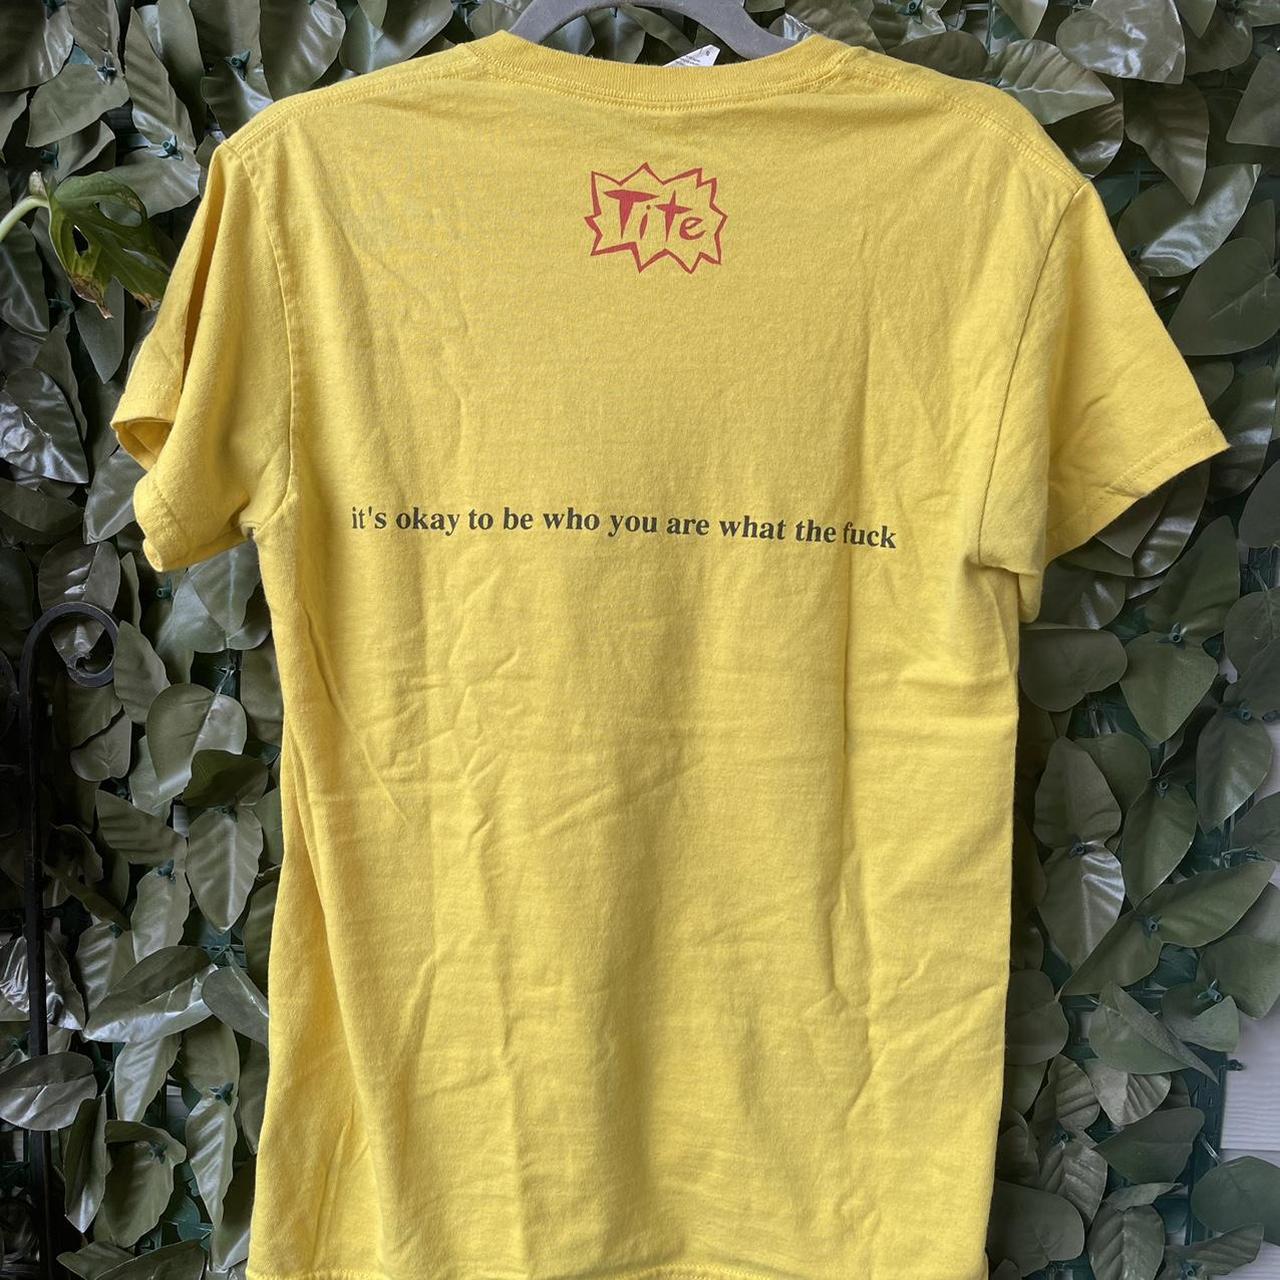 Yellow graphic tee • Brand: Tite • (front) “at the... - Depop